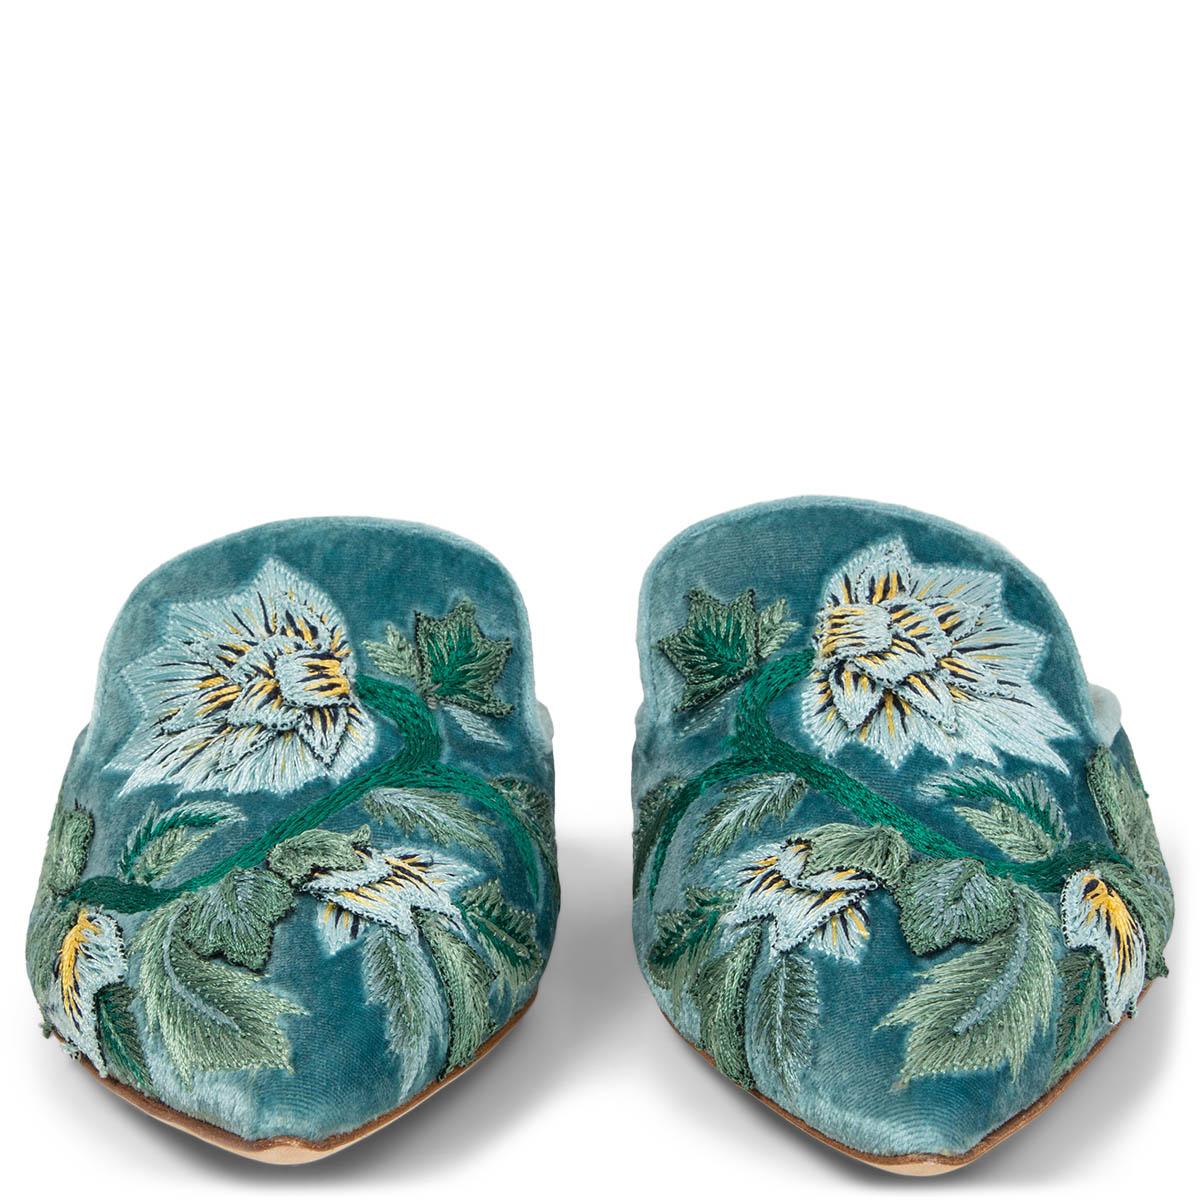 100% authentic Alberta Ferretti Mia pointed-toe mules in light blue velvet with petrol, yellow and navy flower embroidery. Brand new. Come with dust bag. 

Measurements
Imprinted Size	38
Shoe Size	38
Inside Sole	25cm (9.8in)
Width	7.5cm